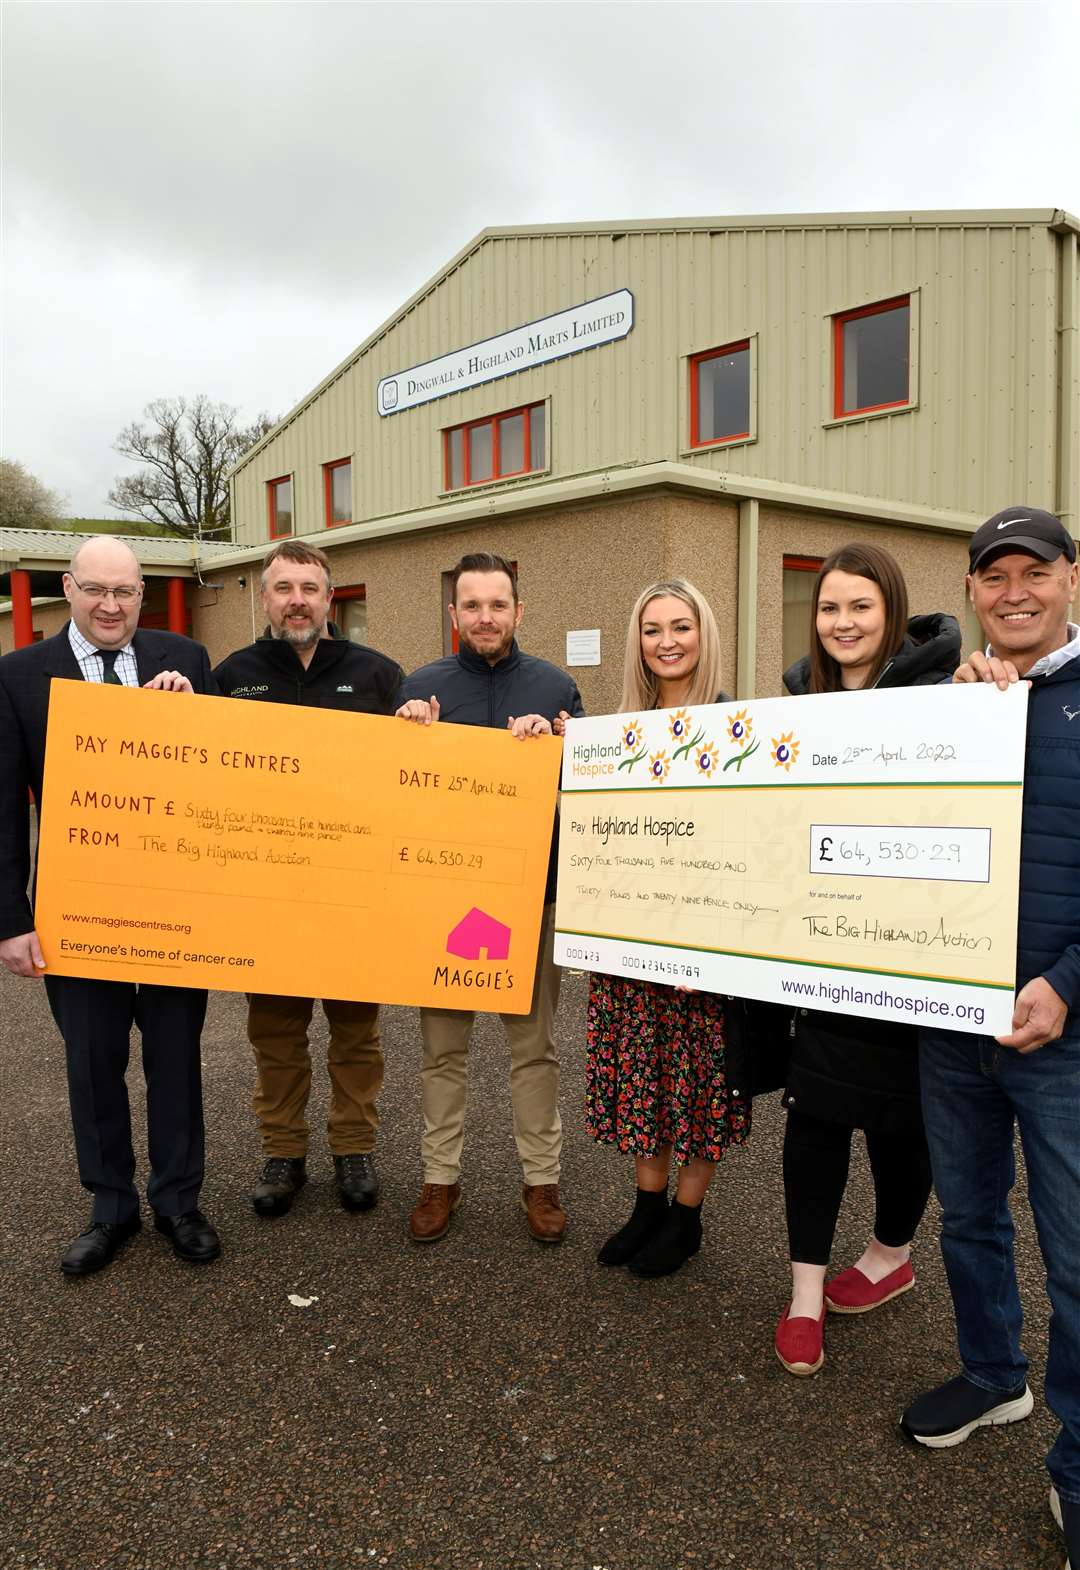 Grant Macpherson, Dingwall Mart Managing Director, John Fyall, Highland Rural, Andrew Benjamin, Maggies Highland, Emma Nicol, Highland Hospice, Charlotte Boa, Maggies Highland and David O'Connor, Ross County Chairman. Picture: James Mackenzie